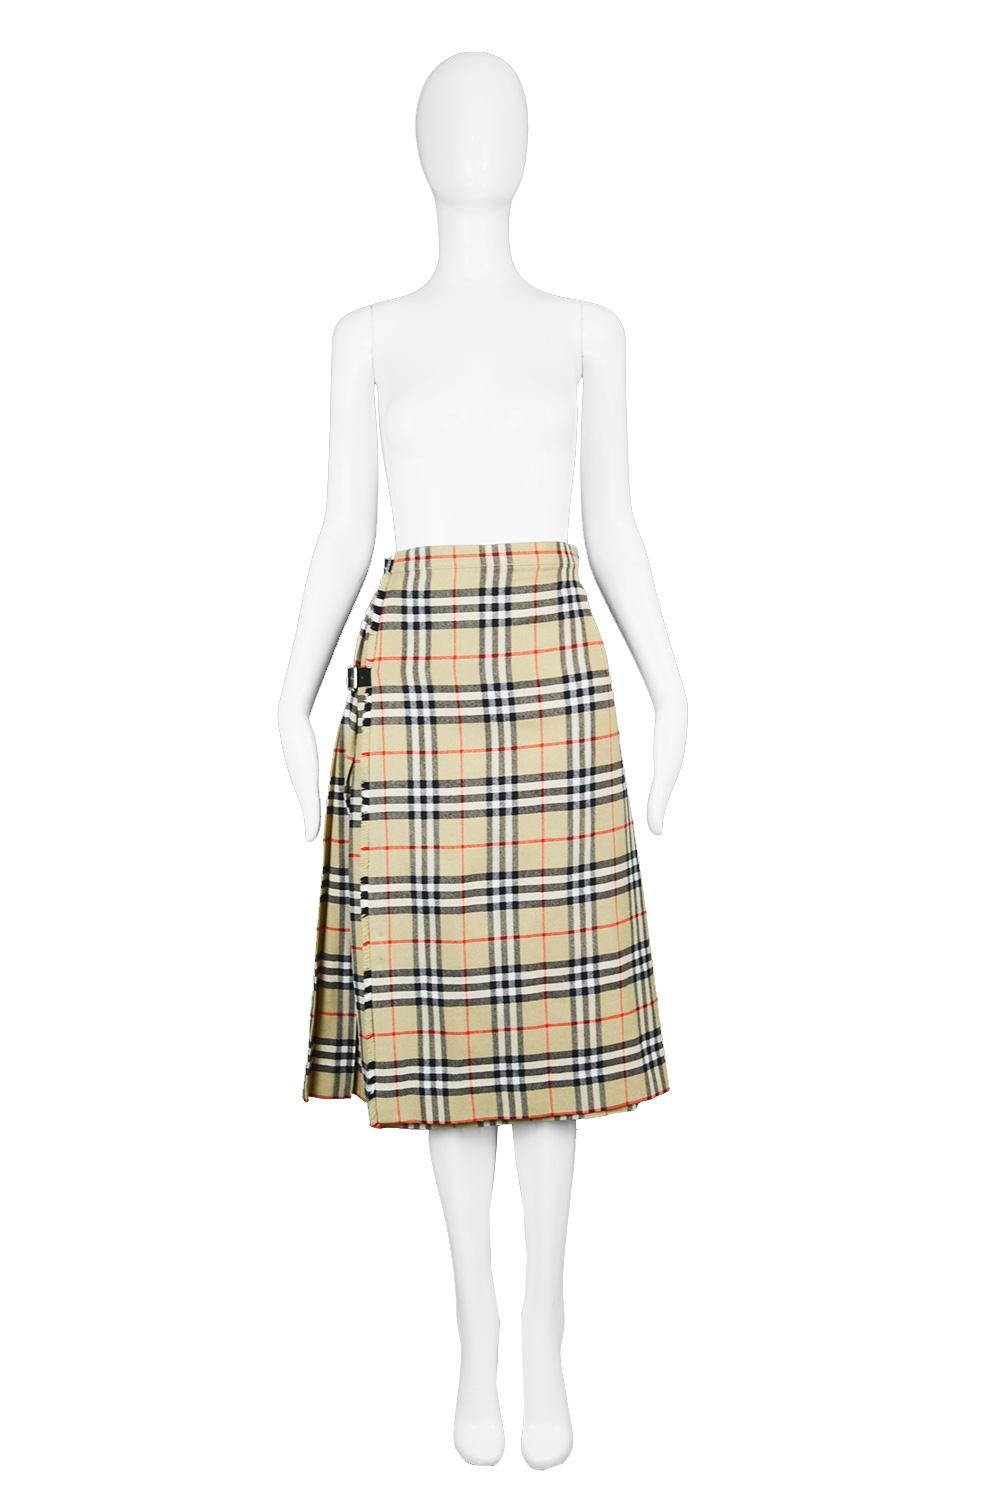 A fabulous vintage women's pleated skirt from the 80s by British luxury fashion house, Burberry (from before 1998 when they dropped the 's', they were known as Burberry's). In a beige pure wool with the iconic house check, 'Nova' checked throughout.